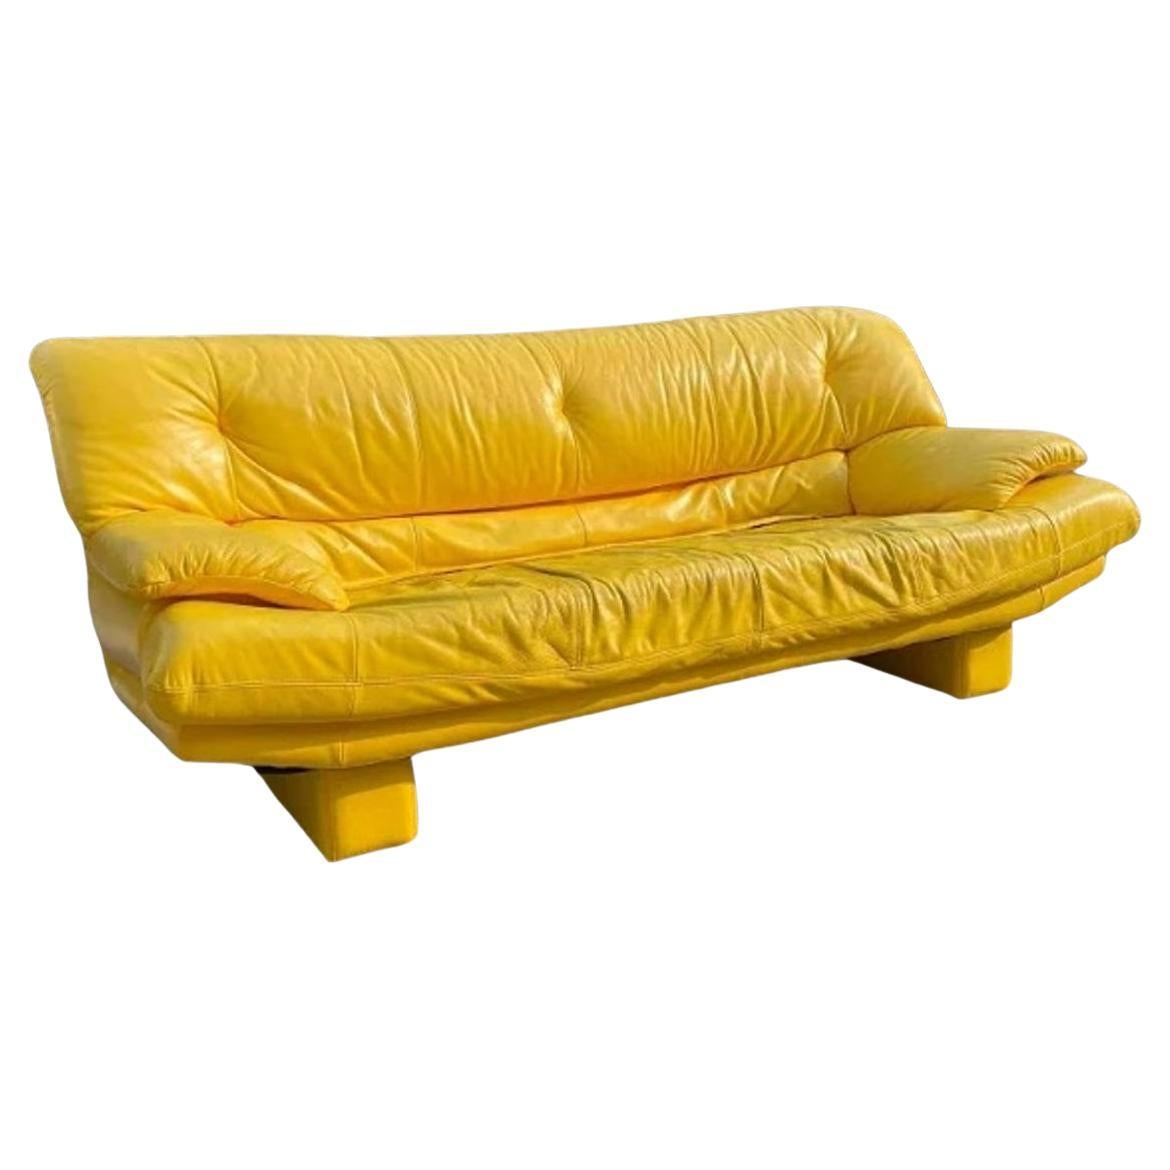 vintage 80s couch